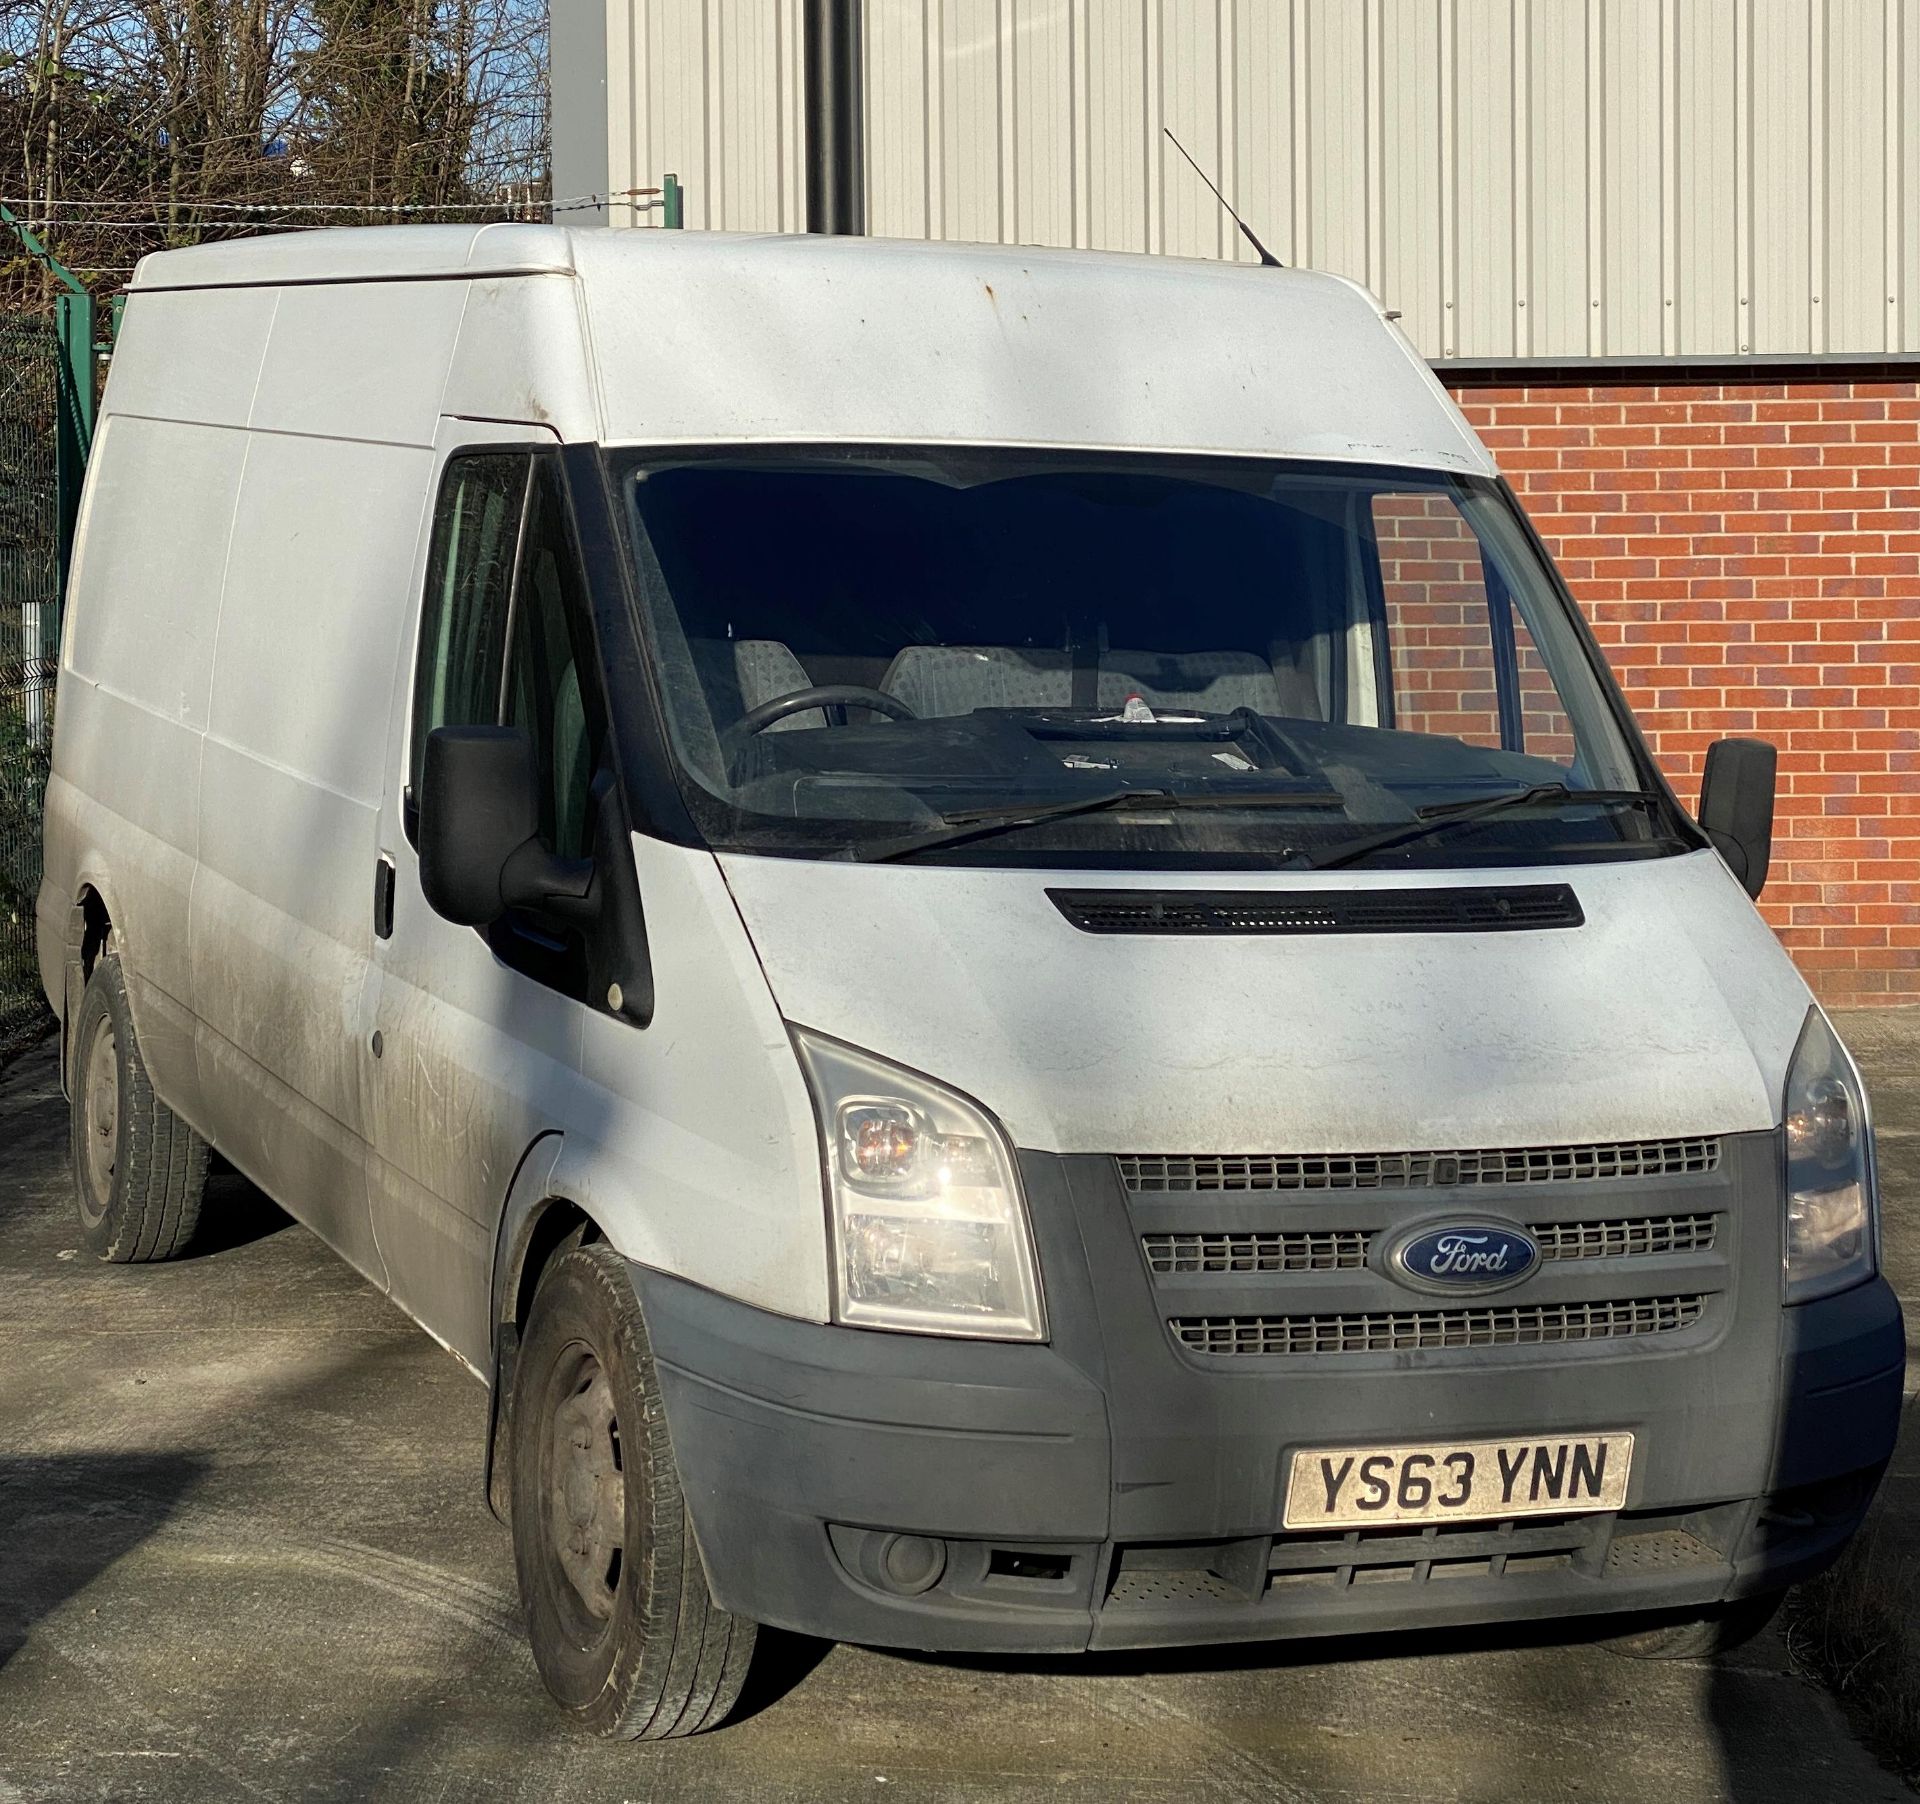 FORD TRANSIT T280 DURATORQ PANEL VAN (listed on HPI as a 125 T350 FWD) - Diesel - White. - Image 4 of 19